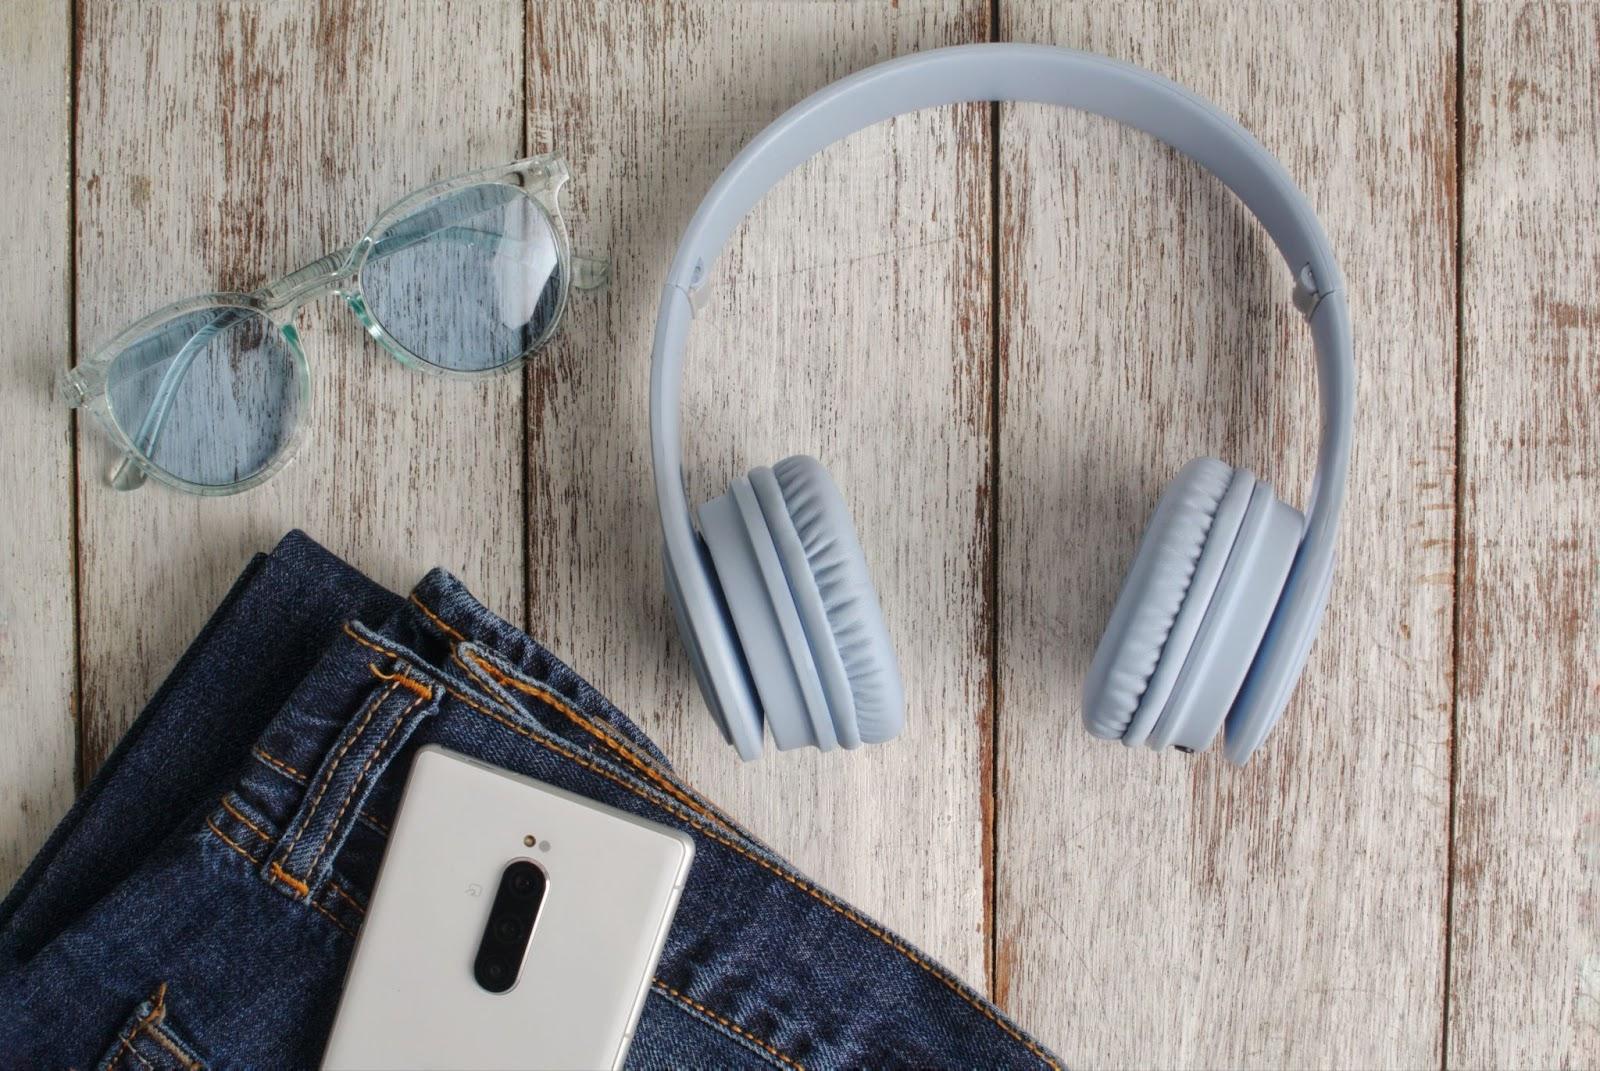 Blue and white lifestyle theme in flatlay concept. Must have item for daily life: smartphone, headphone, jeans and sunglassess